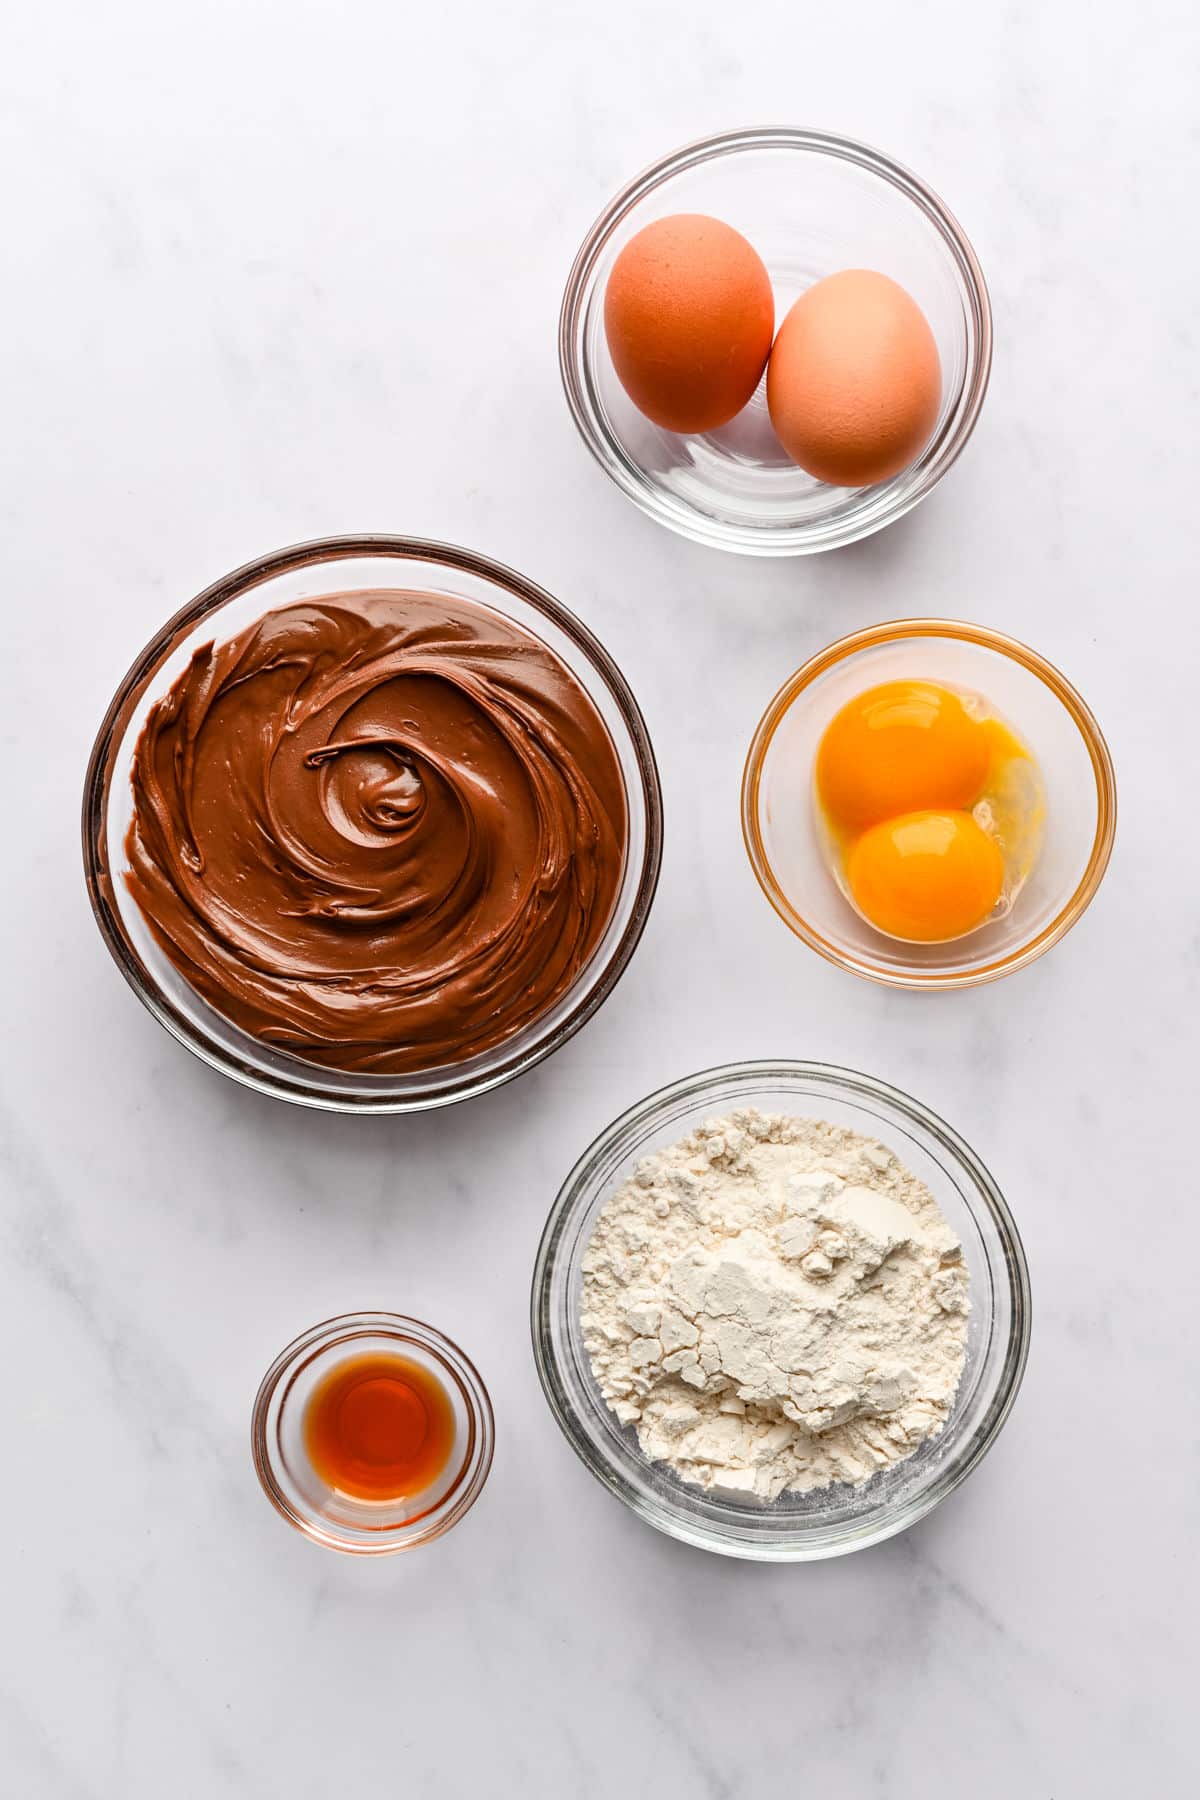 Ingredients for Nutella molten lava cakes in dishes.